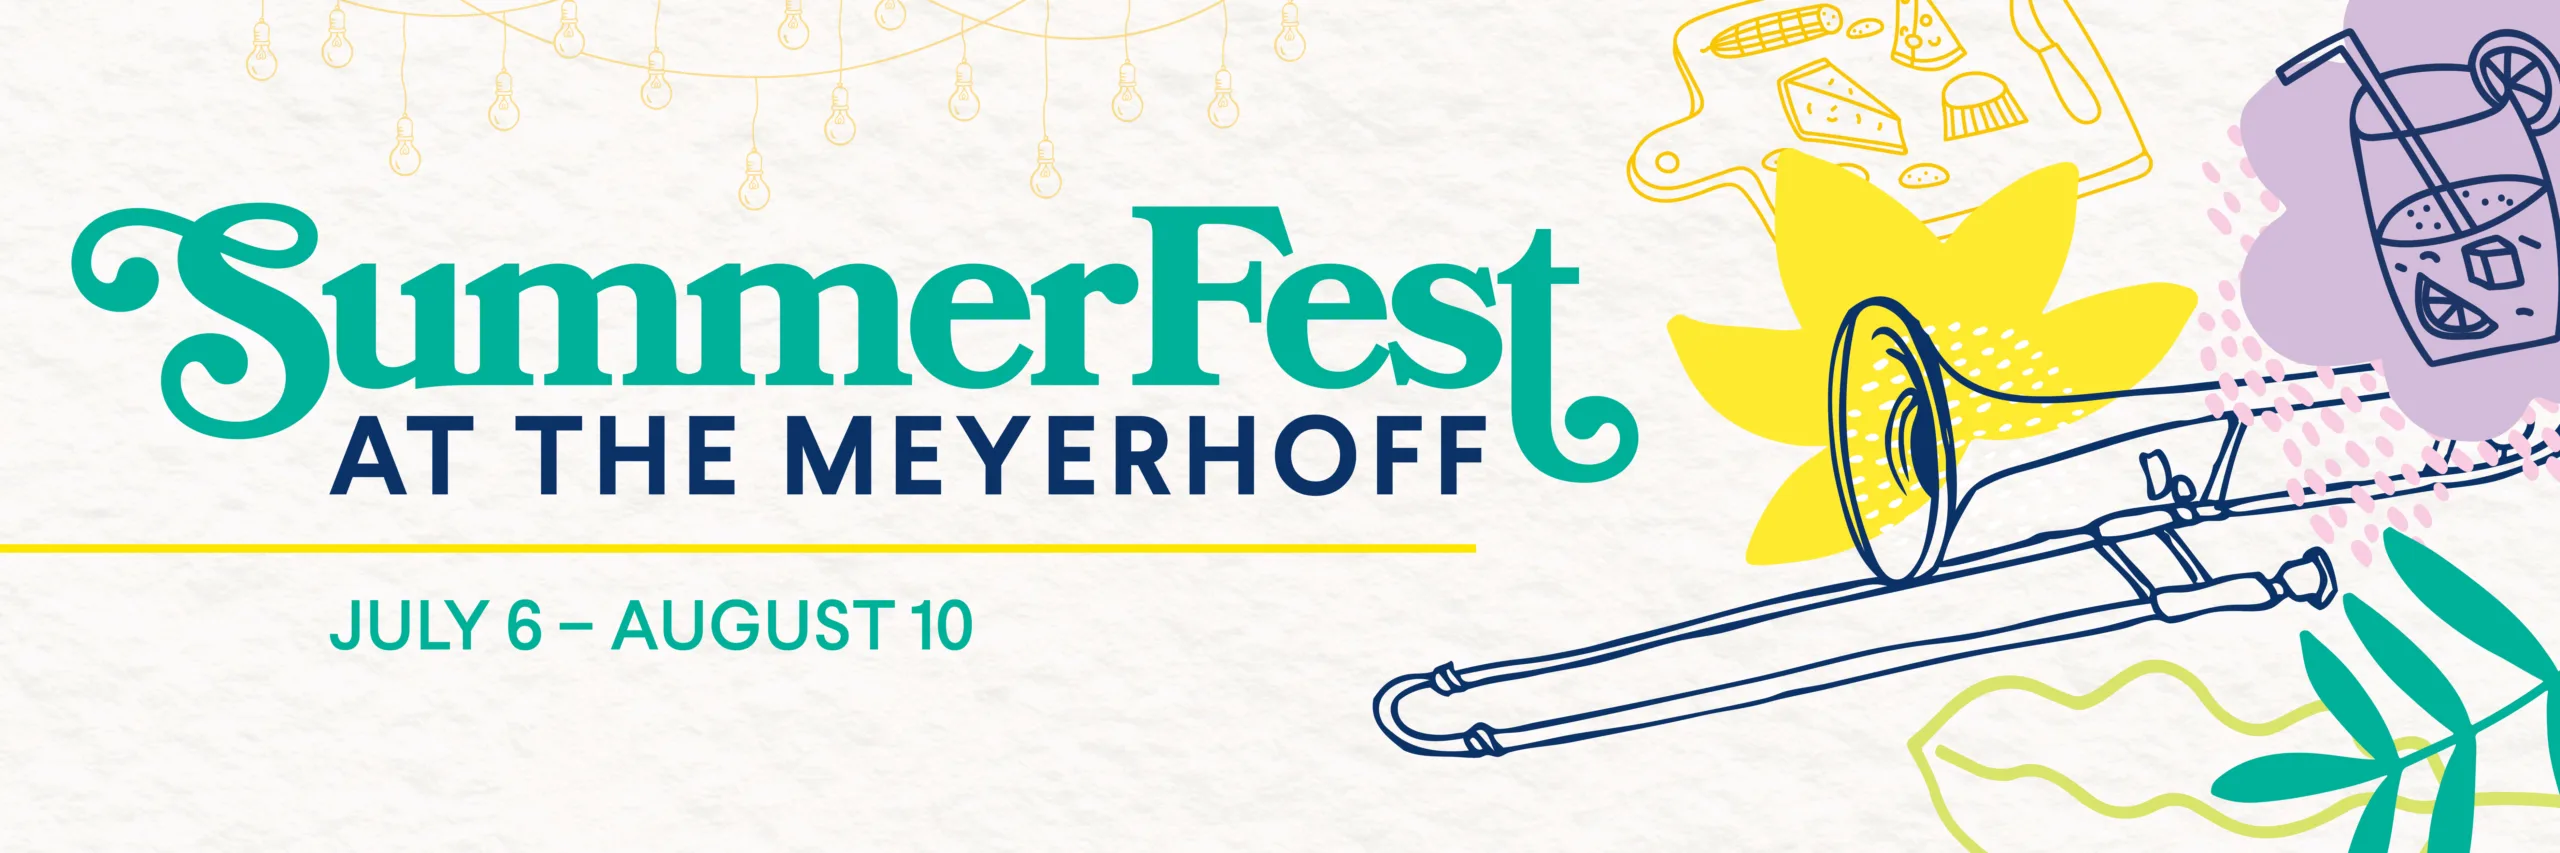 Featured image for “The Baltimore Symphony Orchestra Launches SummerFest at the Meyerhoff”